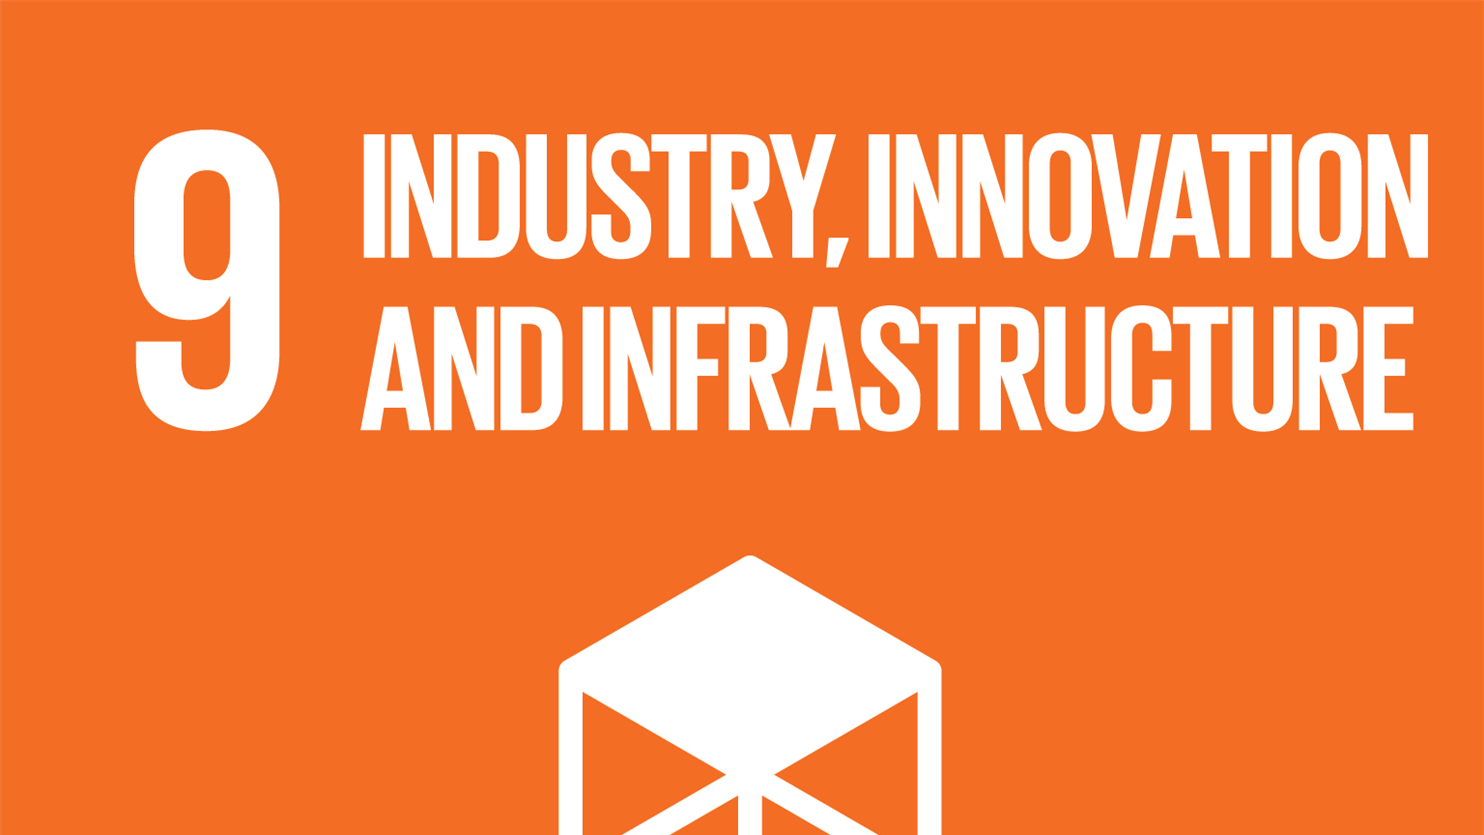 Sustainability goal 9: Industry, Innovation and Infrastructure